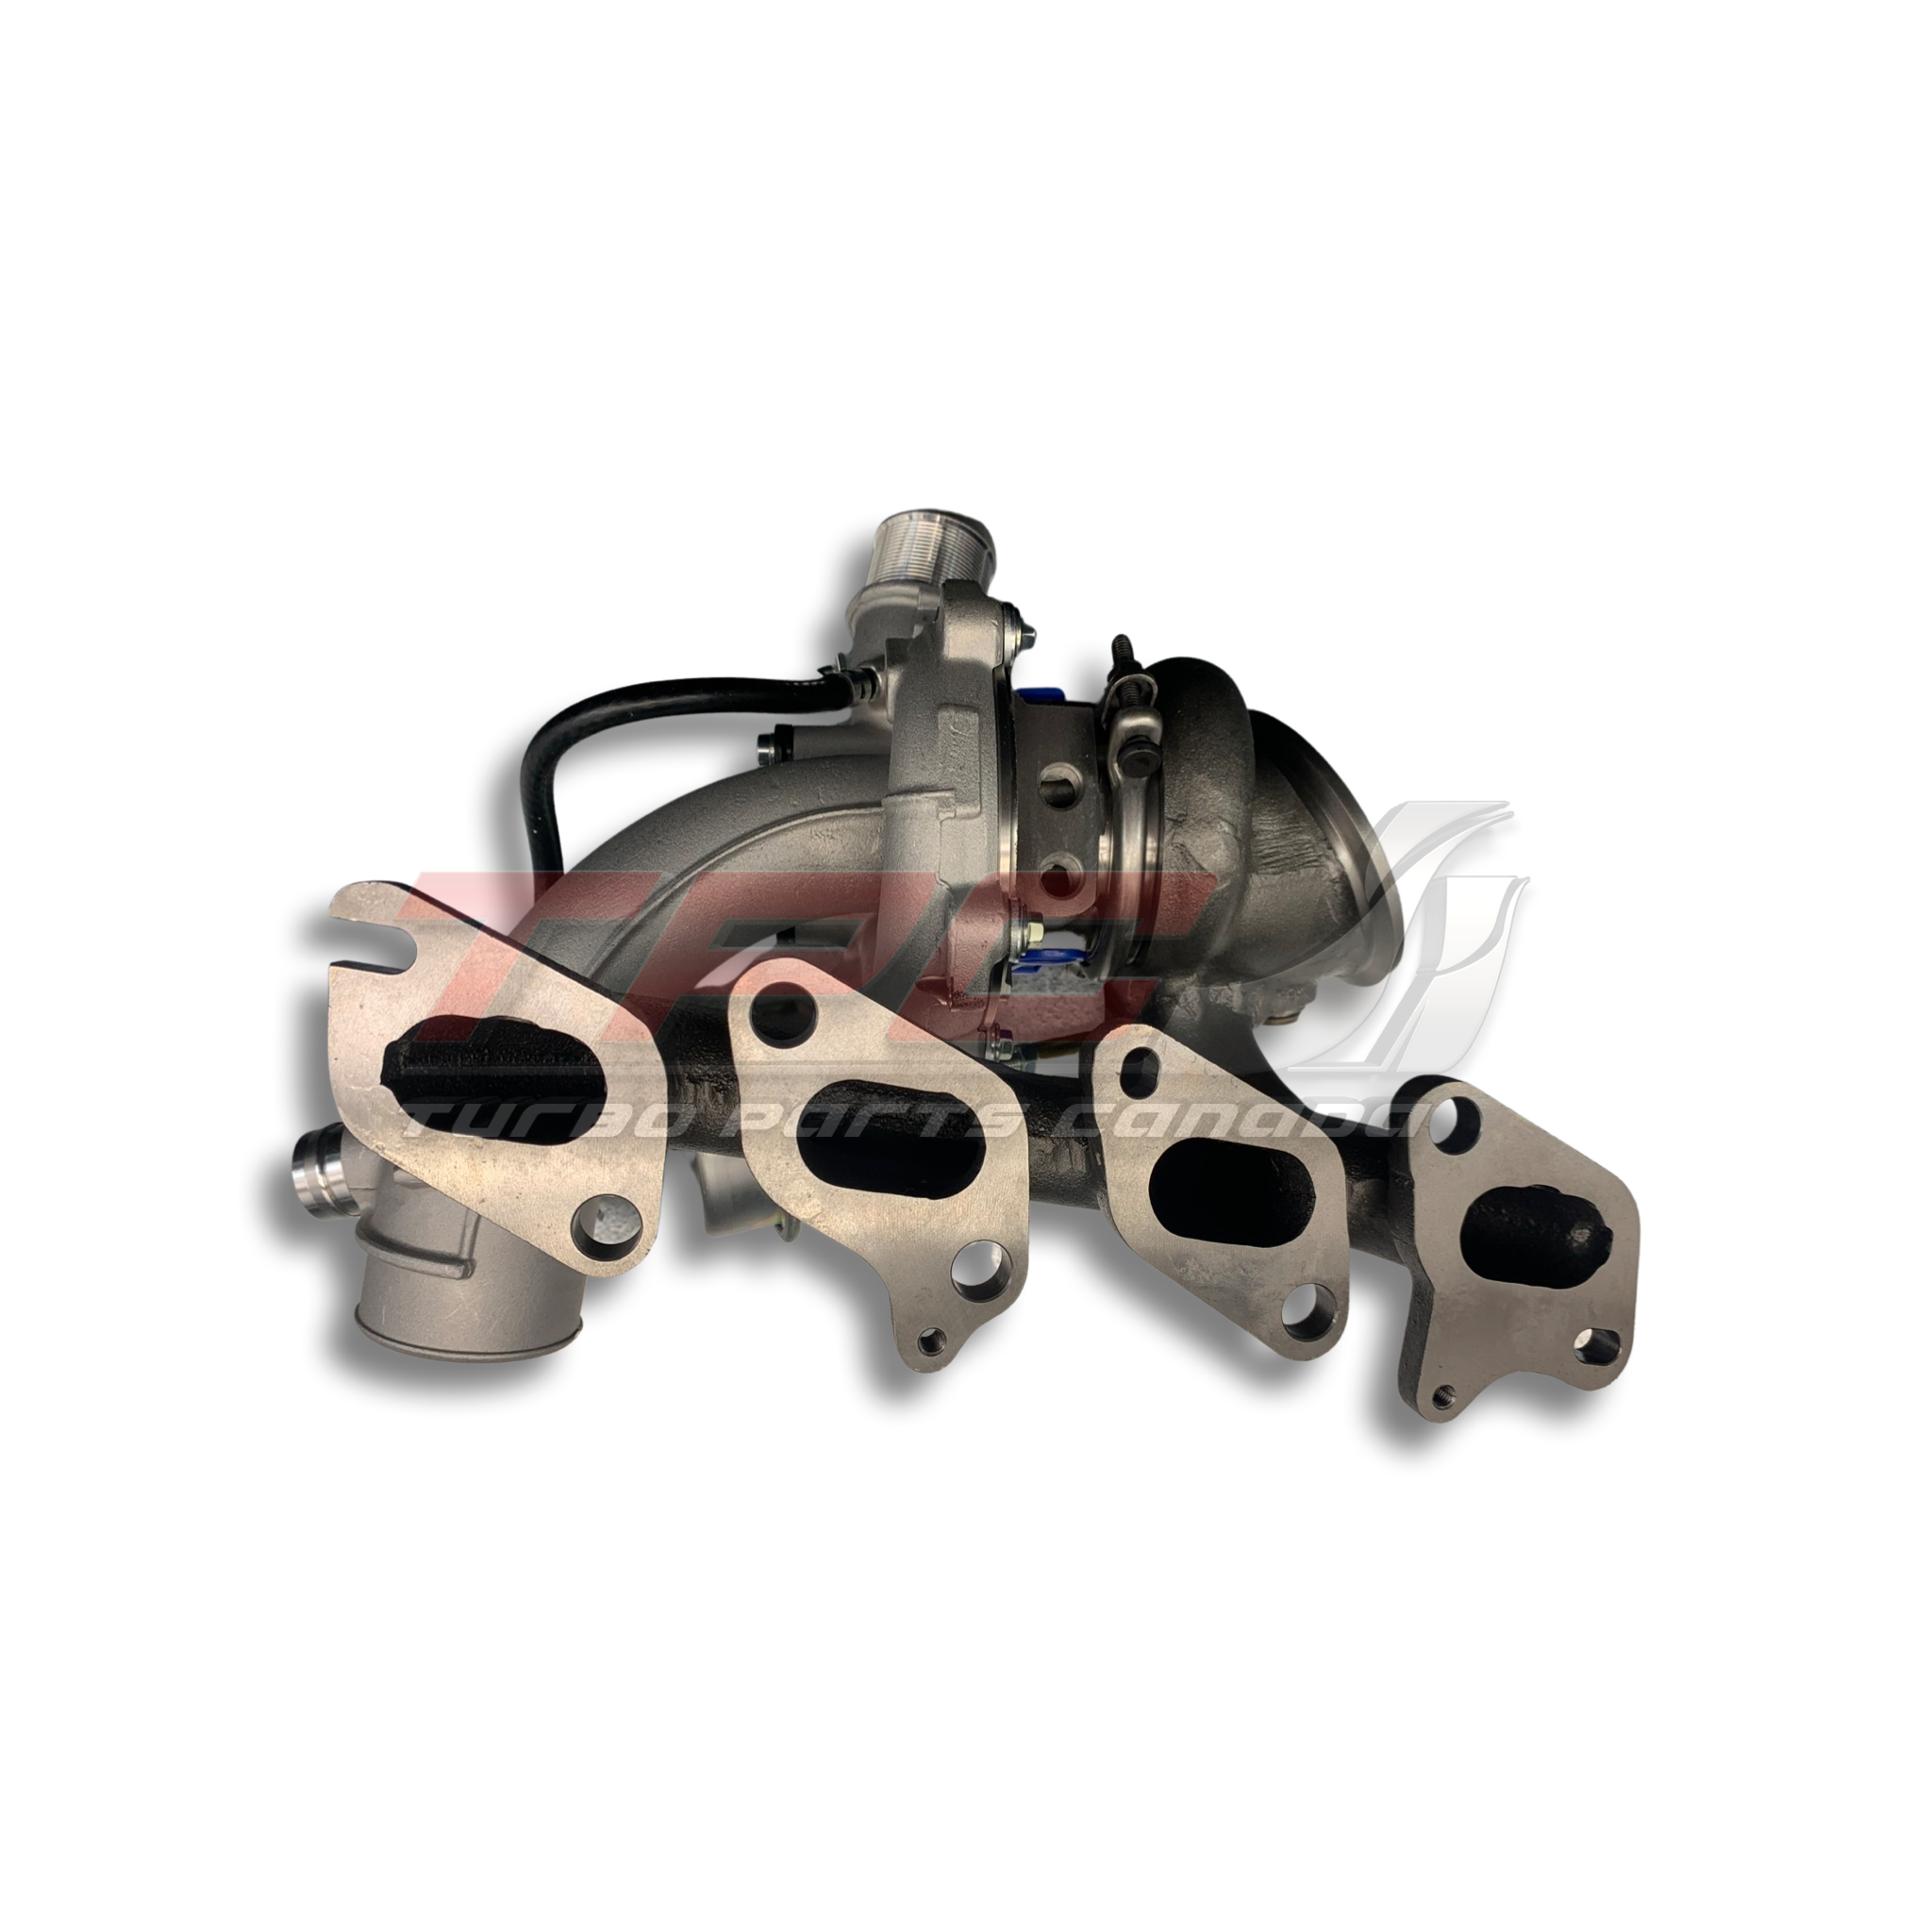 New CHEVROLET CRUZE, SONIC, TRAX AND BUICK ENCORE OEM TURBOCHARGER 1.4L - Turbo Parts Canada Inc. 